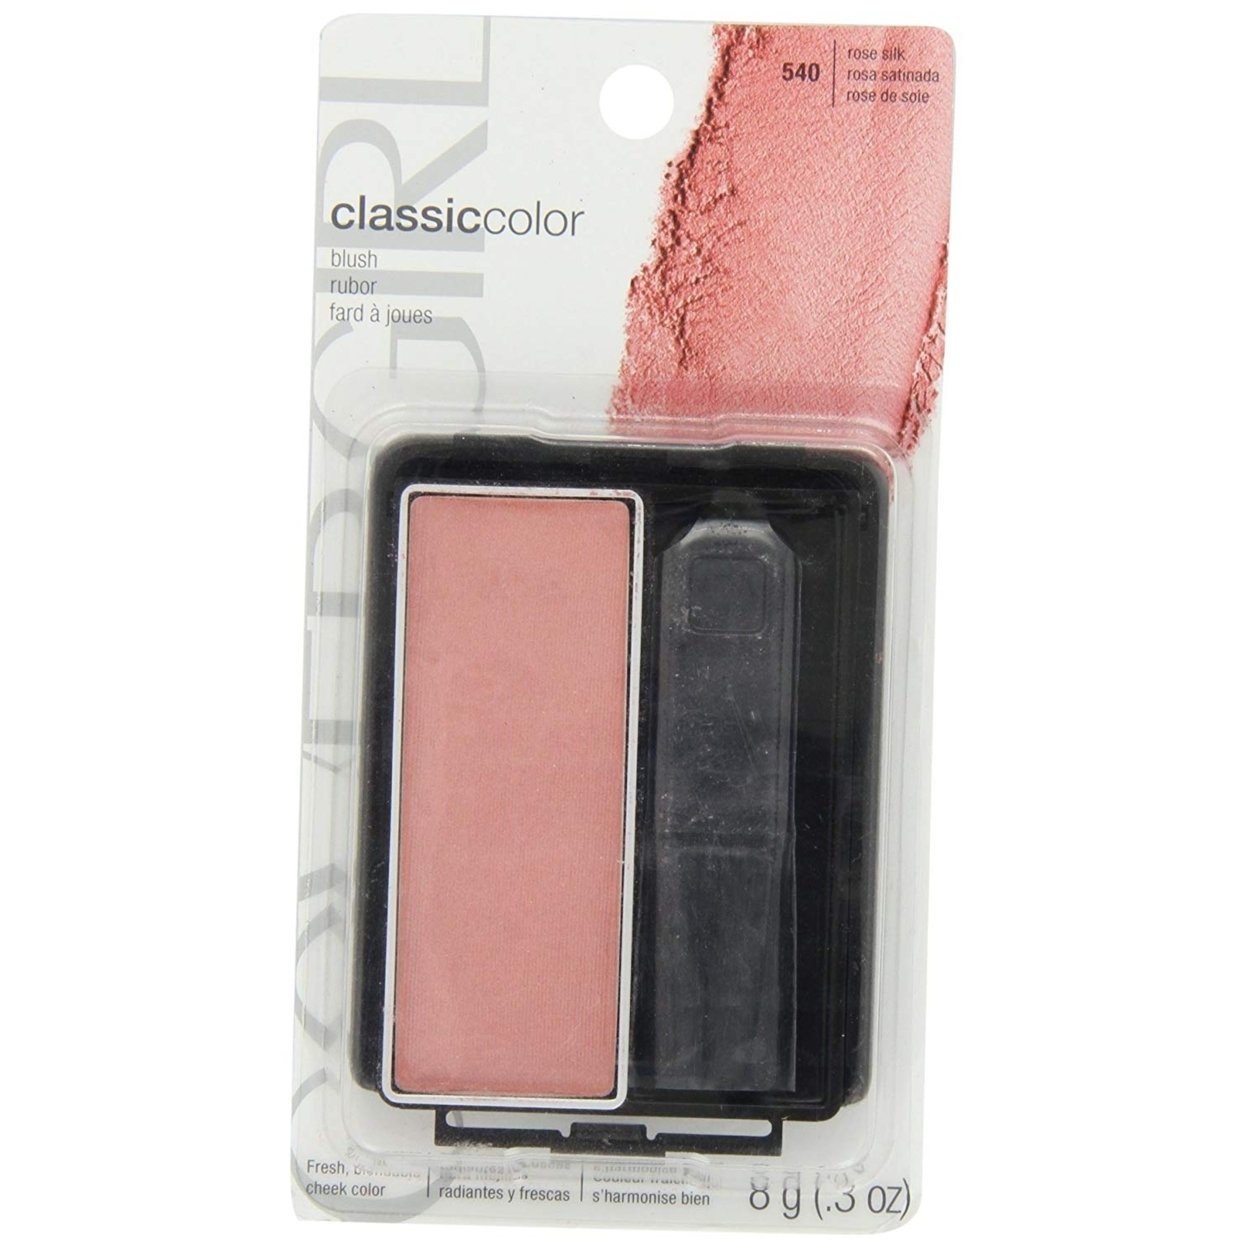 CoverGirl Classic Color Blush Rose Silk(N) 540, 0.3-Ounce Pan